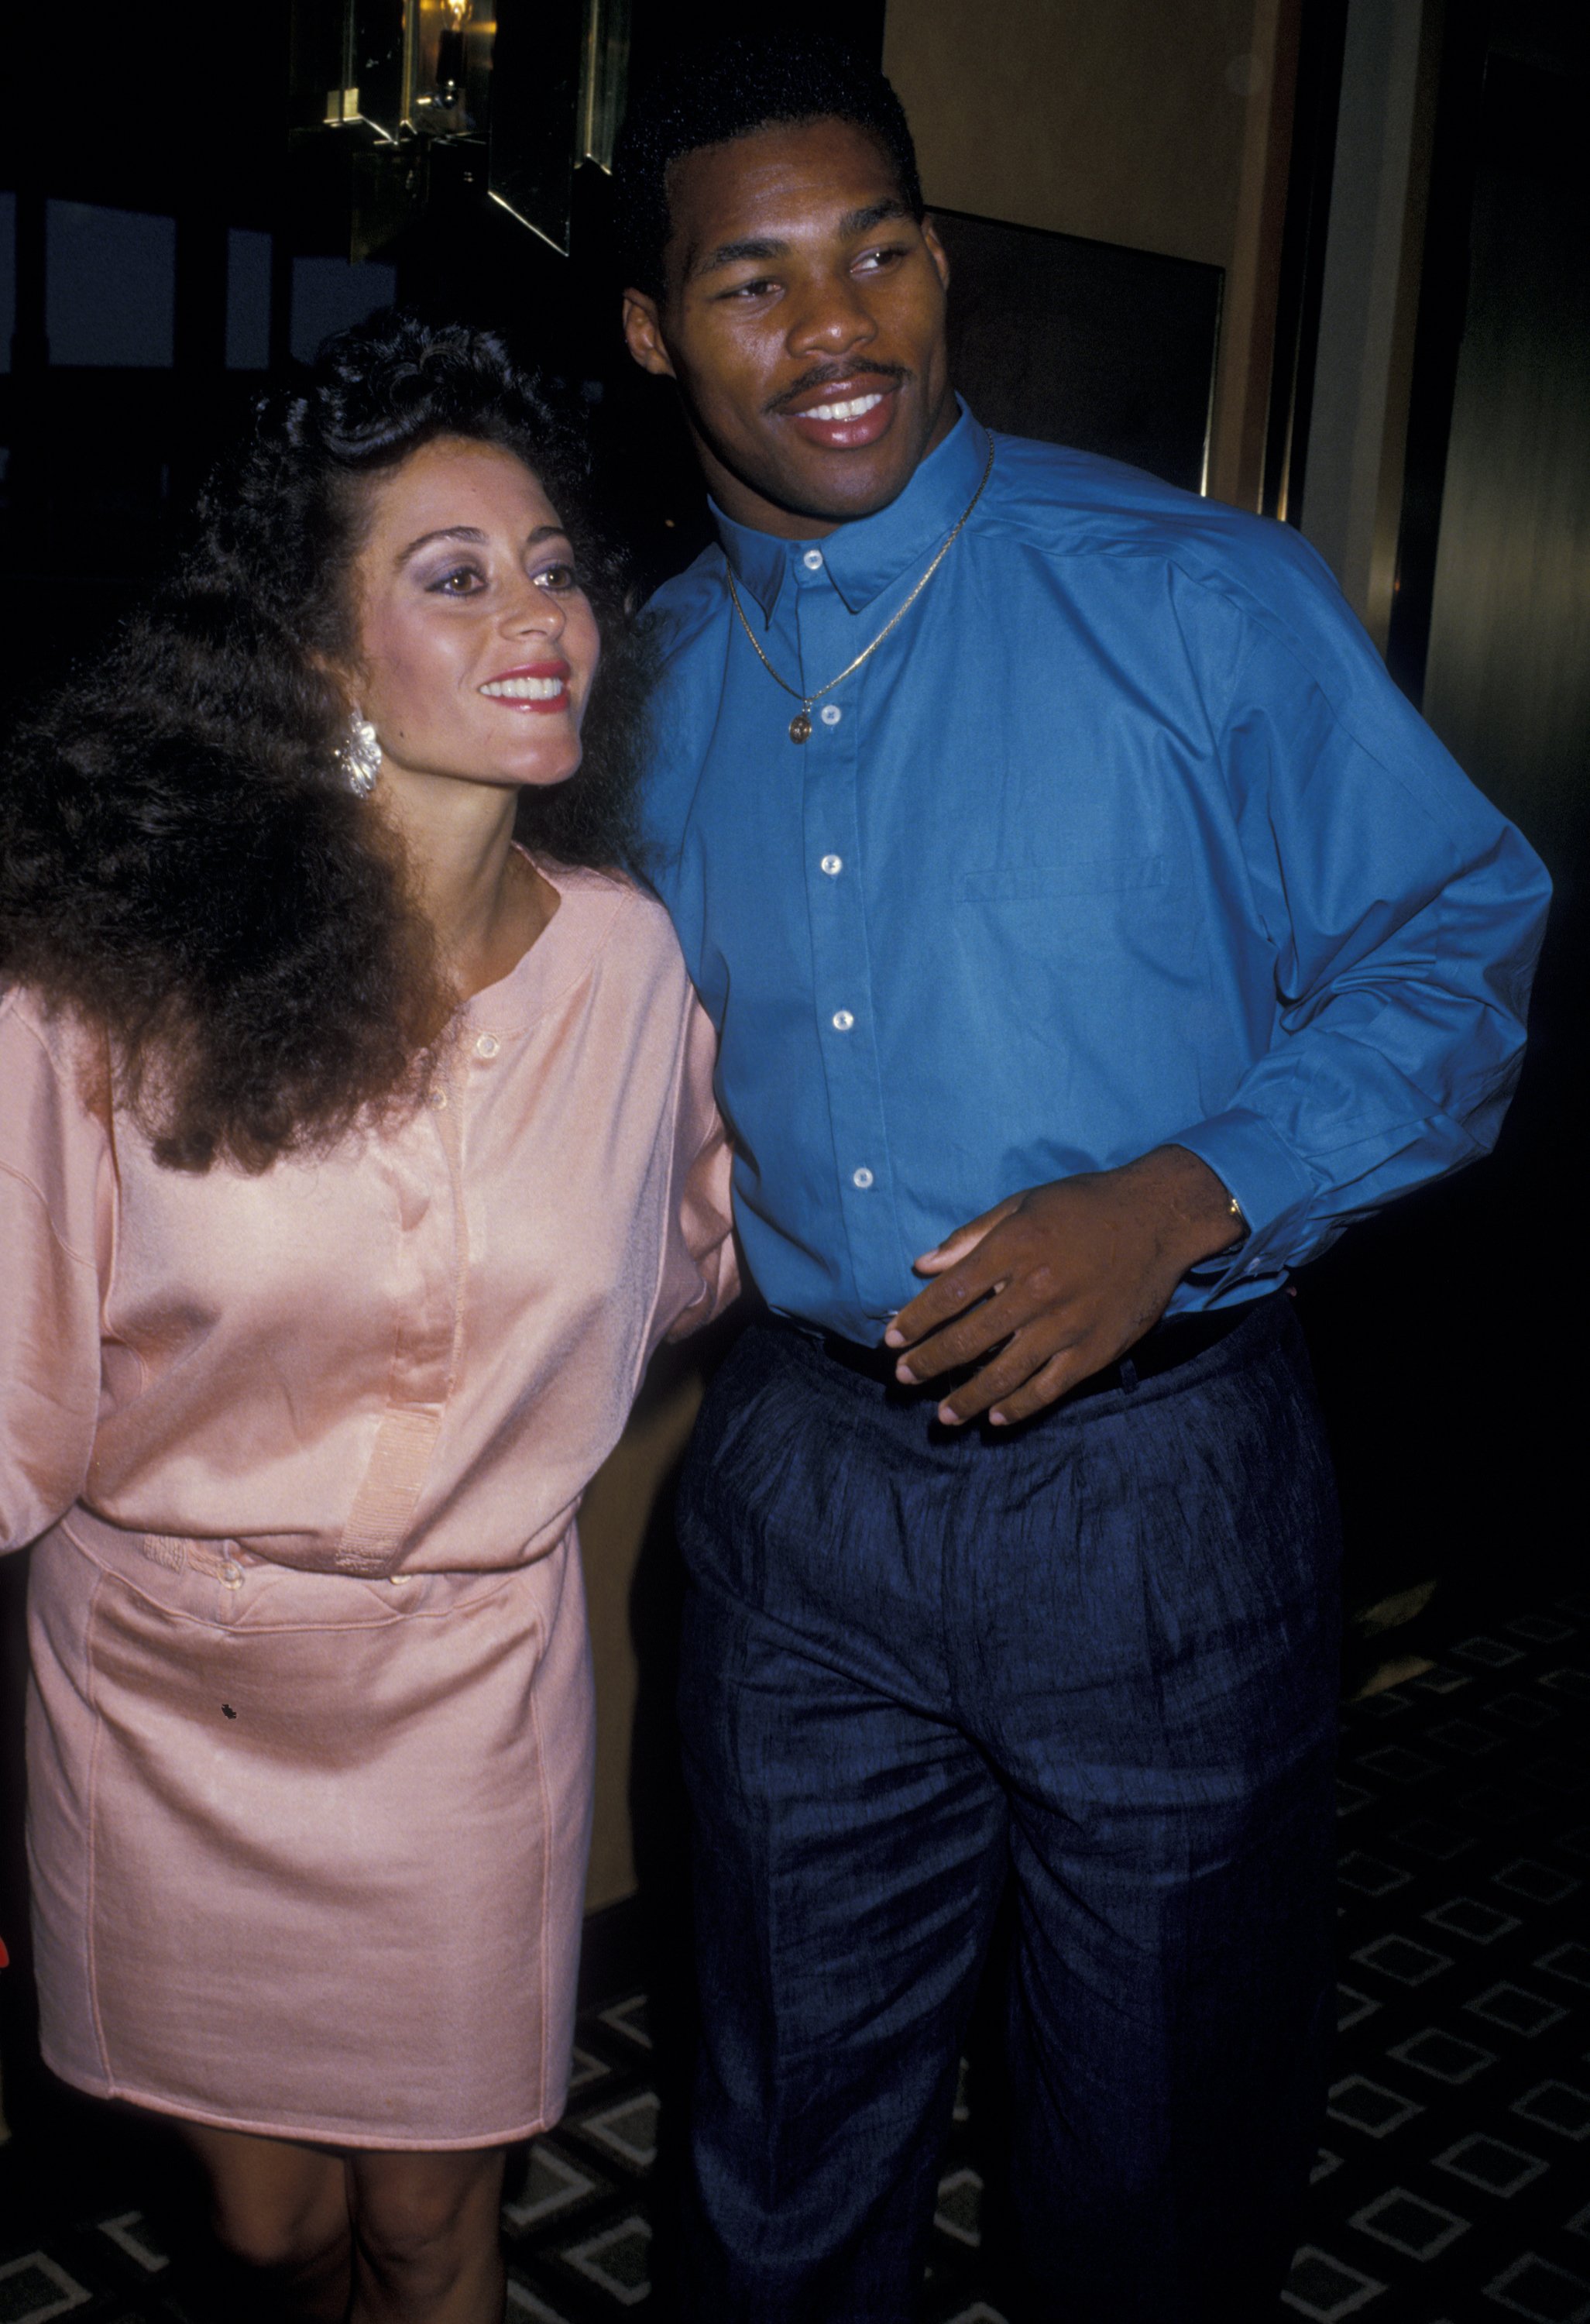 Cindy DeAngelis Grossman and Herschel Walker at a press conference at the New Jersey Generals training camp at the University in Orlando on June 27, 1988 | Source: Getty Images